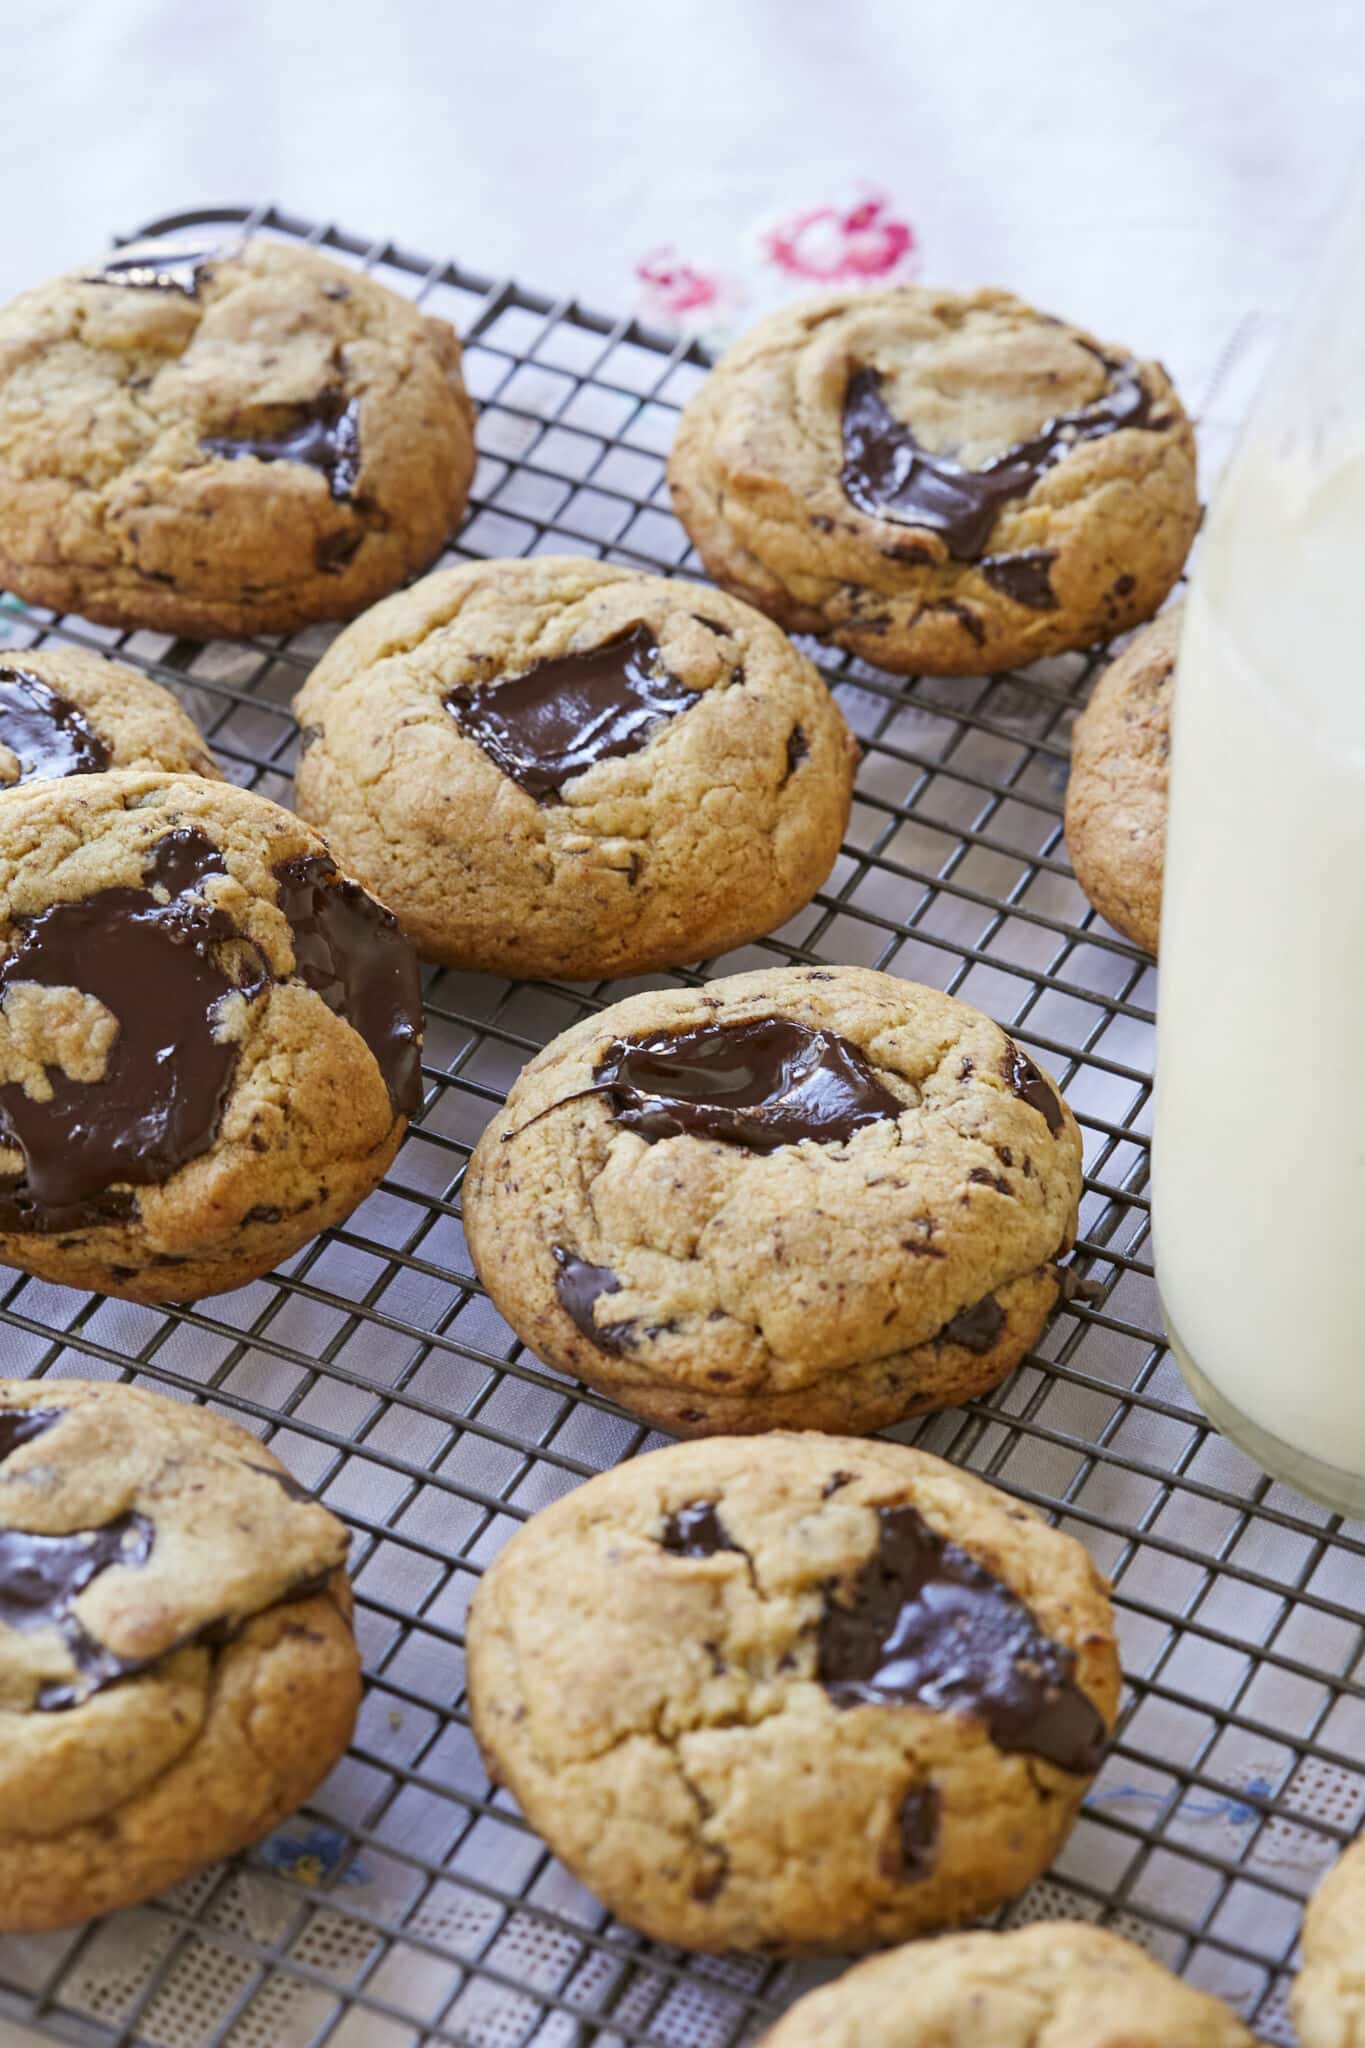 Sourdough Chocolate Chip cookies are baked golden brown with pools of chocolate throughout are cooling on a wire rack. They're paired with milk.